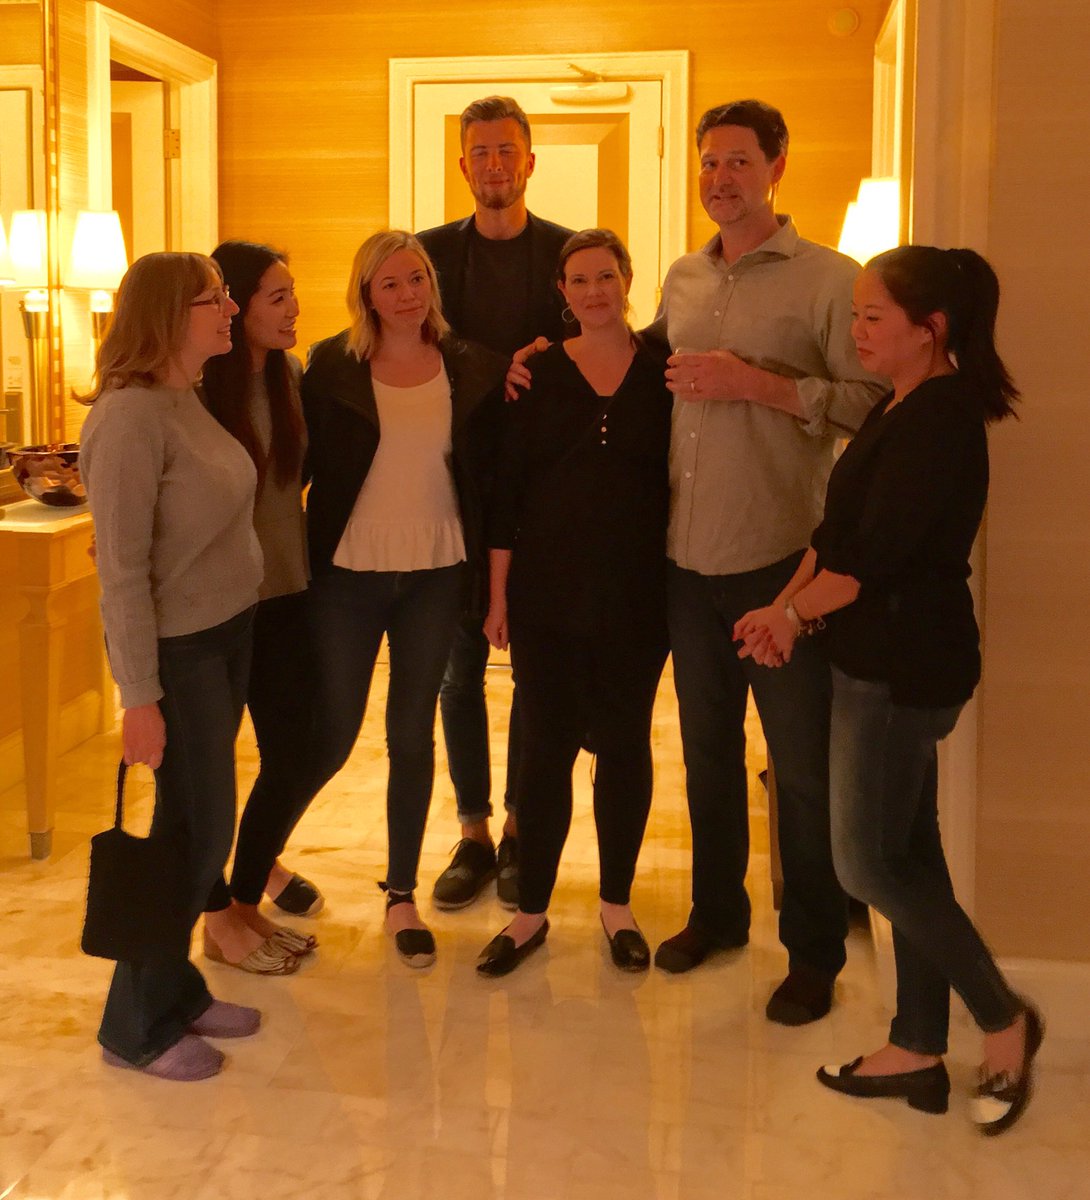 benmarks: No one deserved last night's sleep more than the @magento Events team. They do truly inspiring work! #MagentoImagine https://t.co/mbndzbmwyf